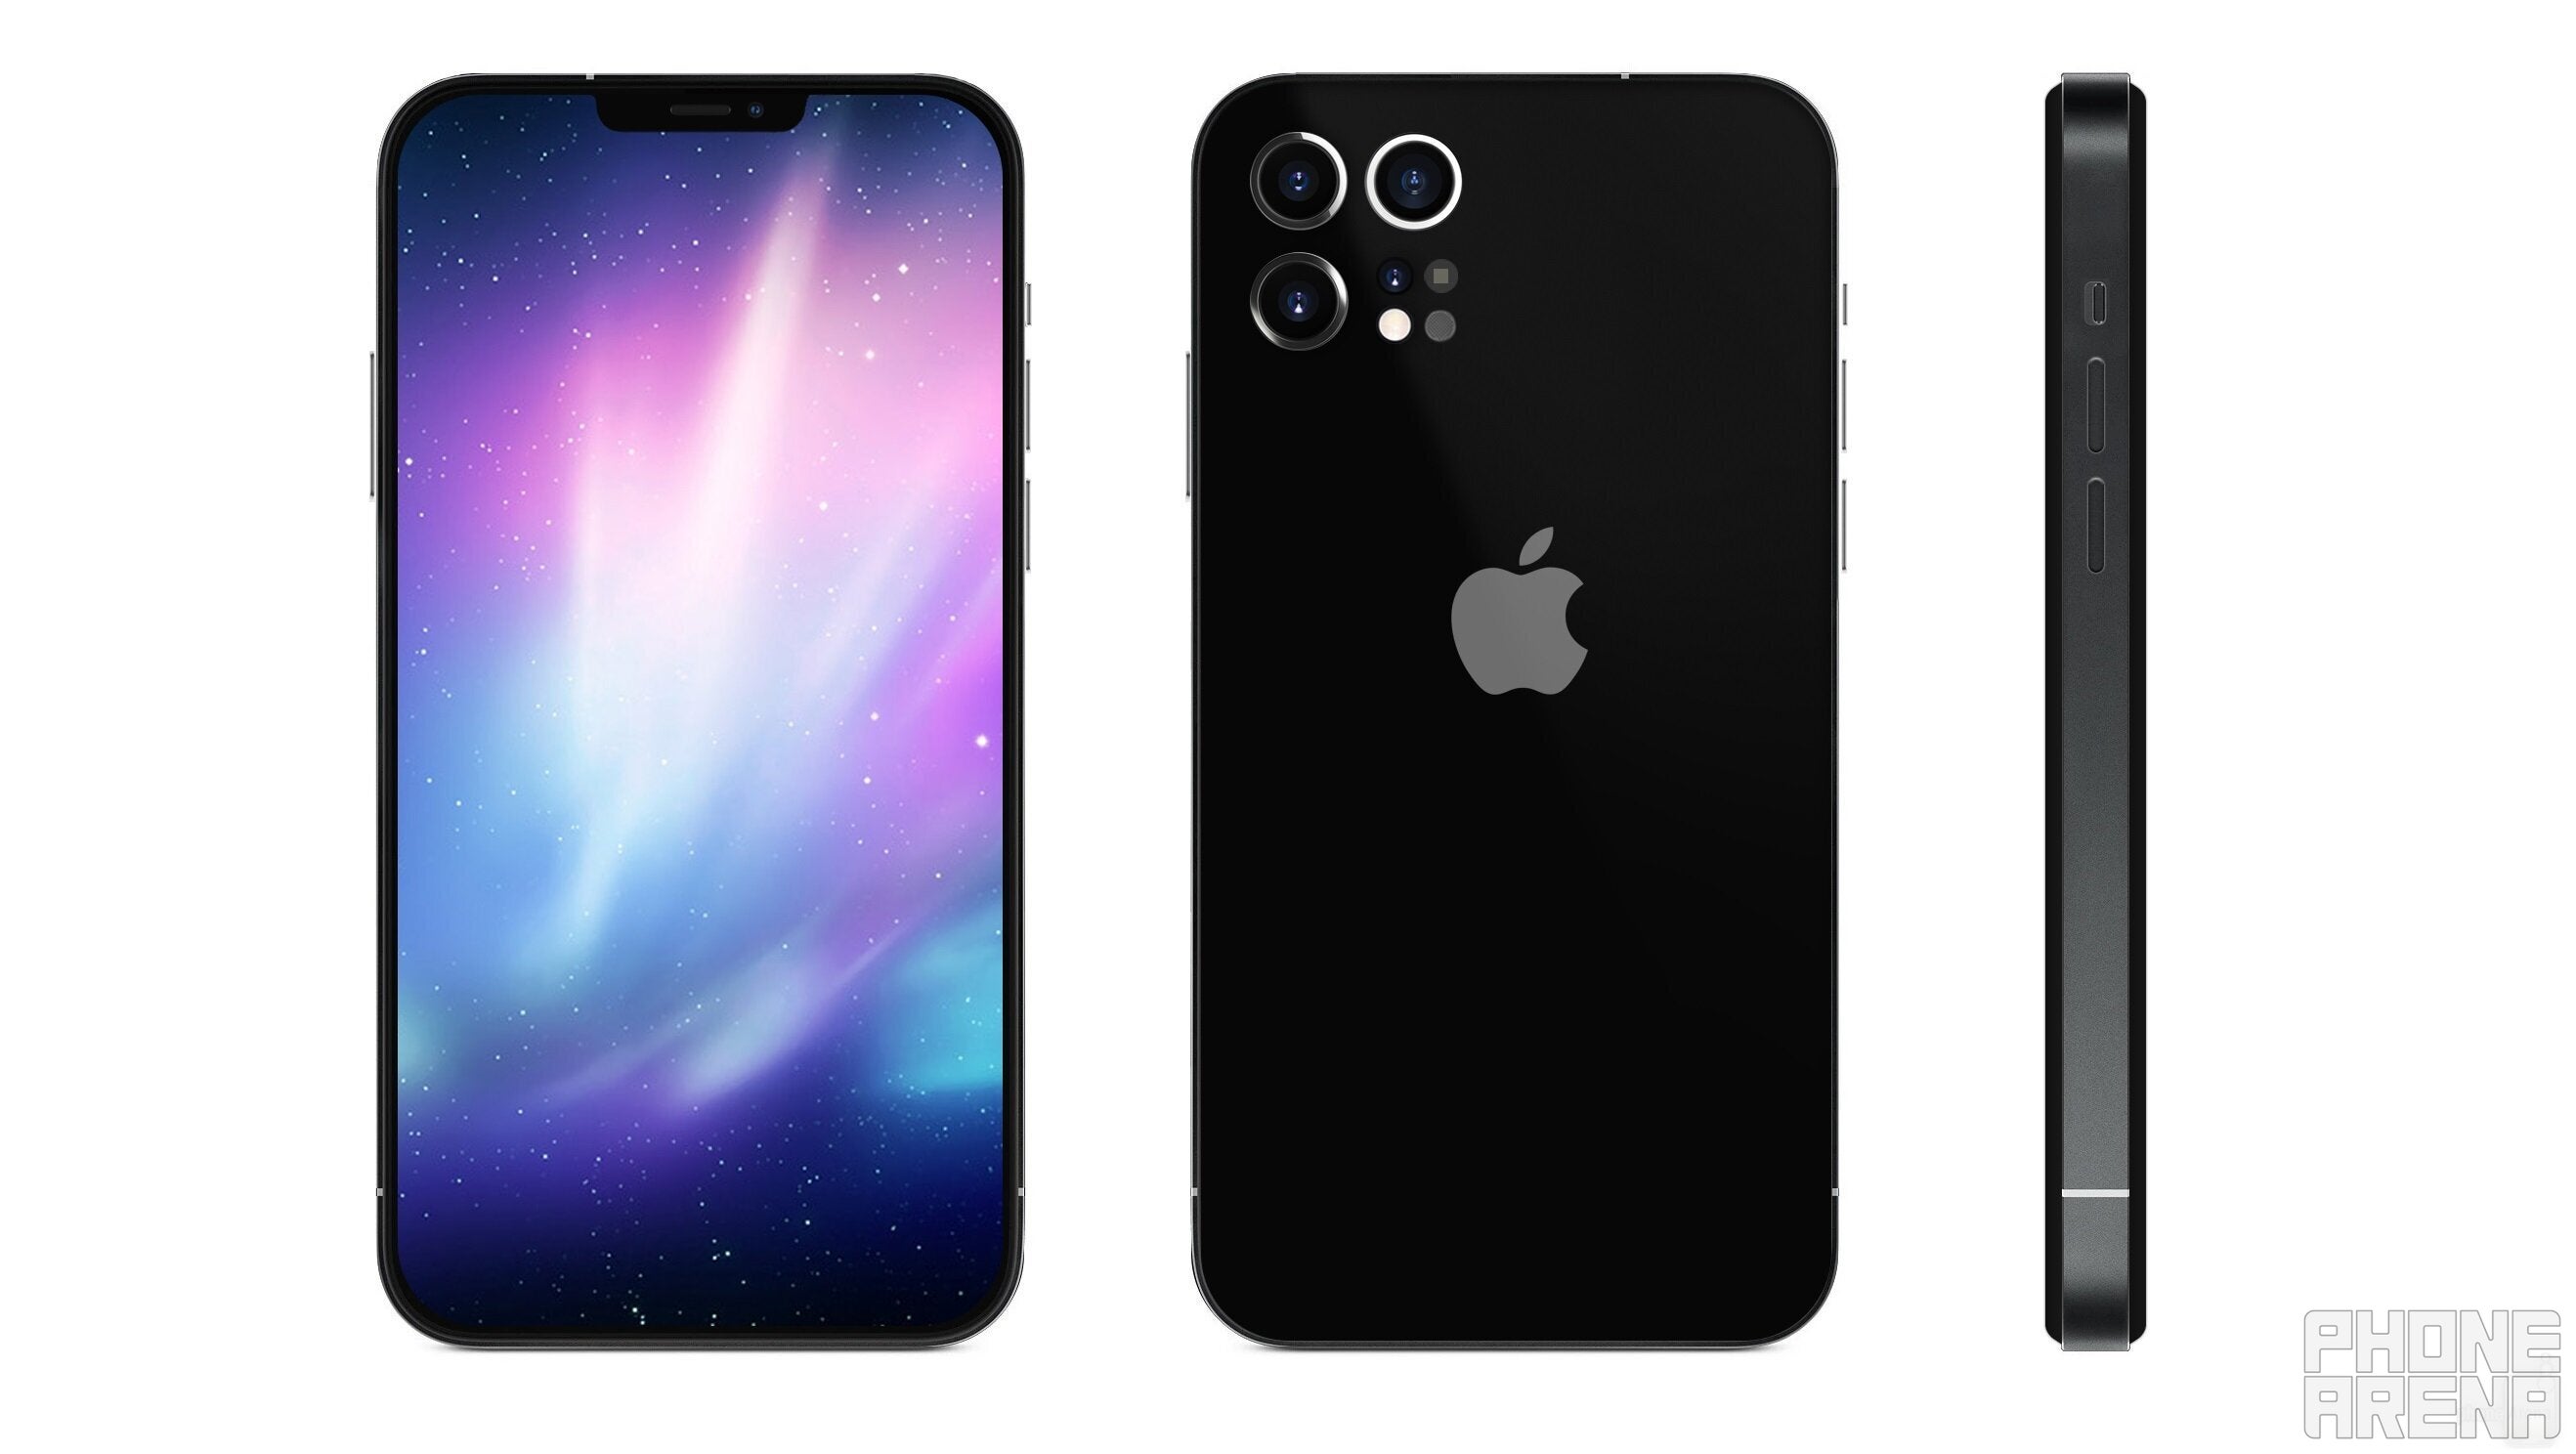 iPhone 12 concept by PhoneArena - iPhone 12 vs iPhone 12 Pro: what may be the key differences?